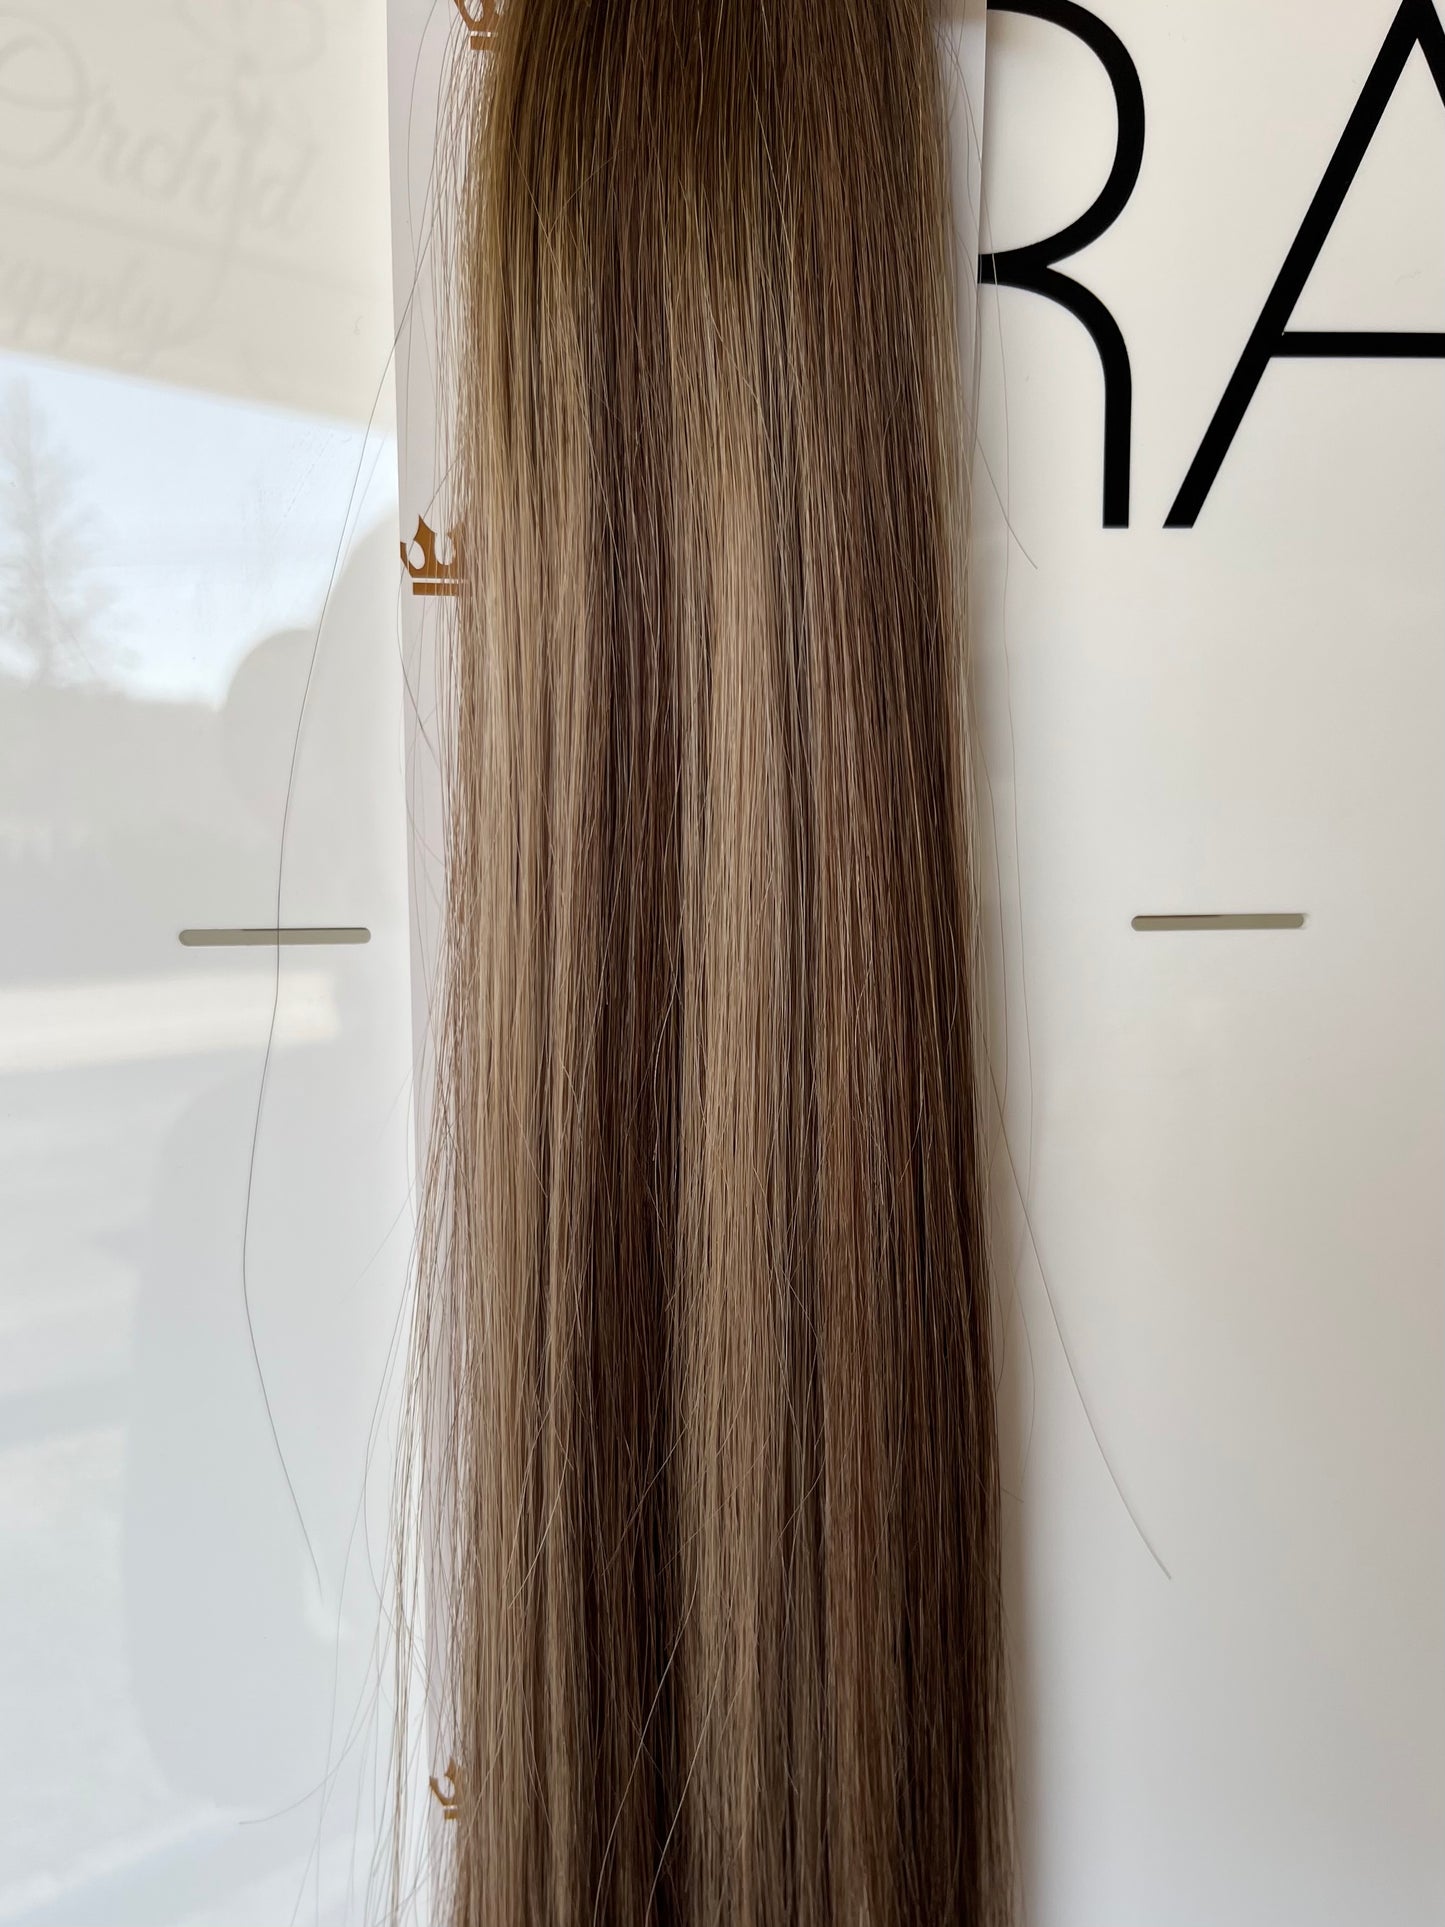 RETAIL CLIP IN EXTENSIONS - BALAYAGE - TIGERS EYE